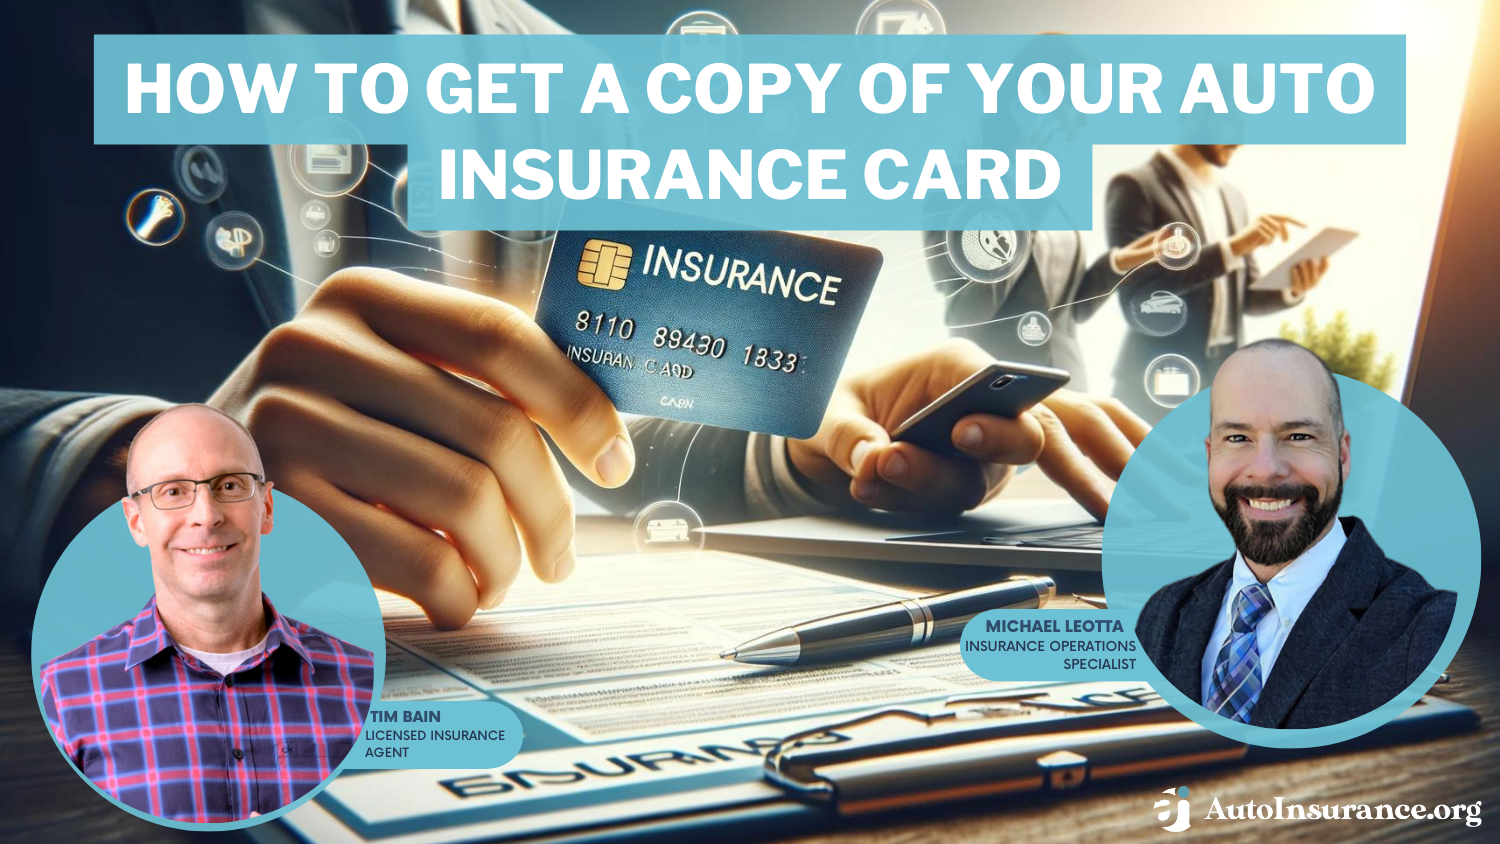 How to Get a Copy of Your Auto Insurance Card